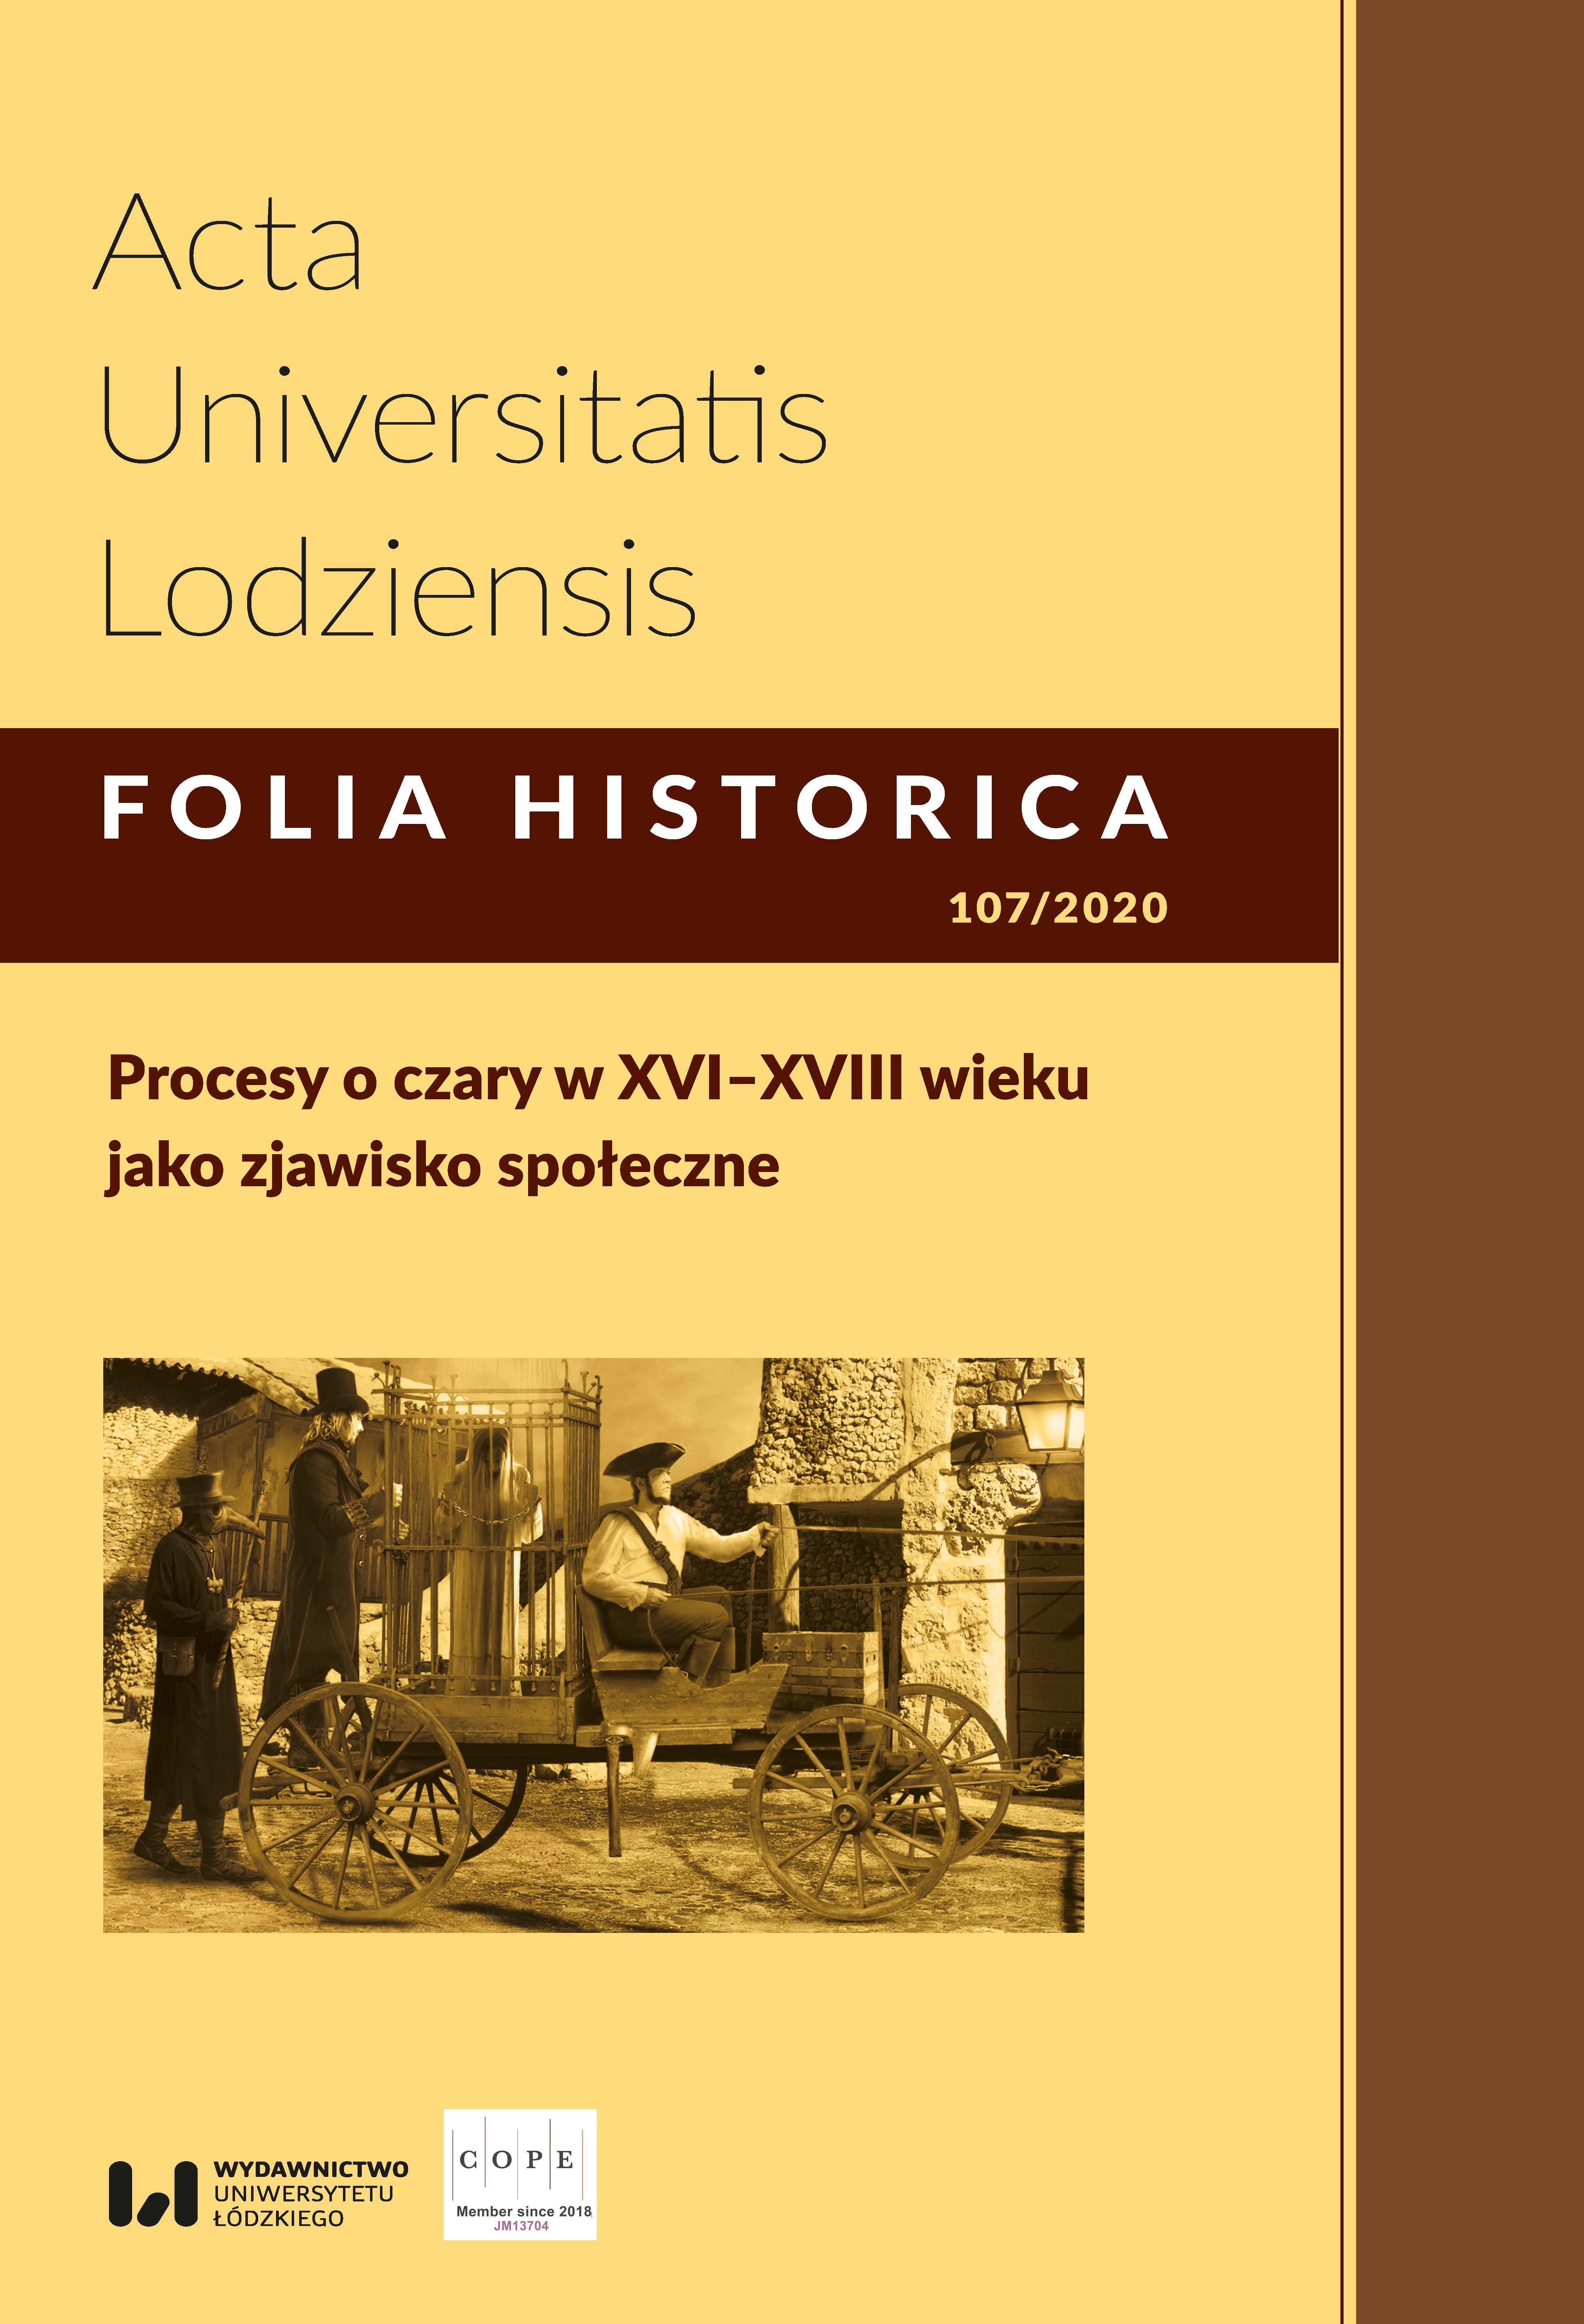 The image of the witch-woman in the recent Polish historiography of the witch trials during the early modern period Cover Image